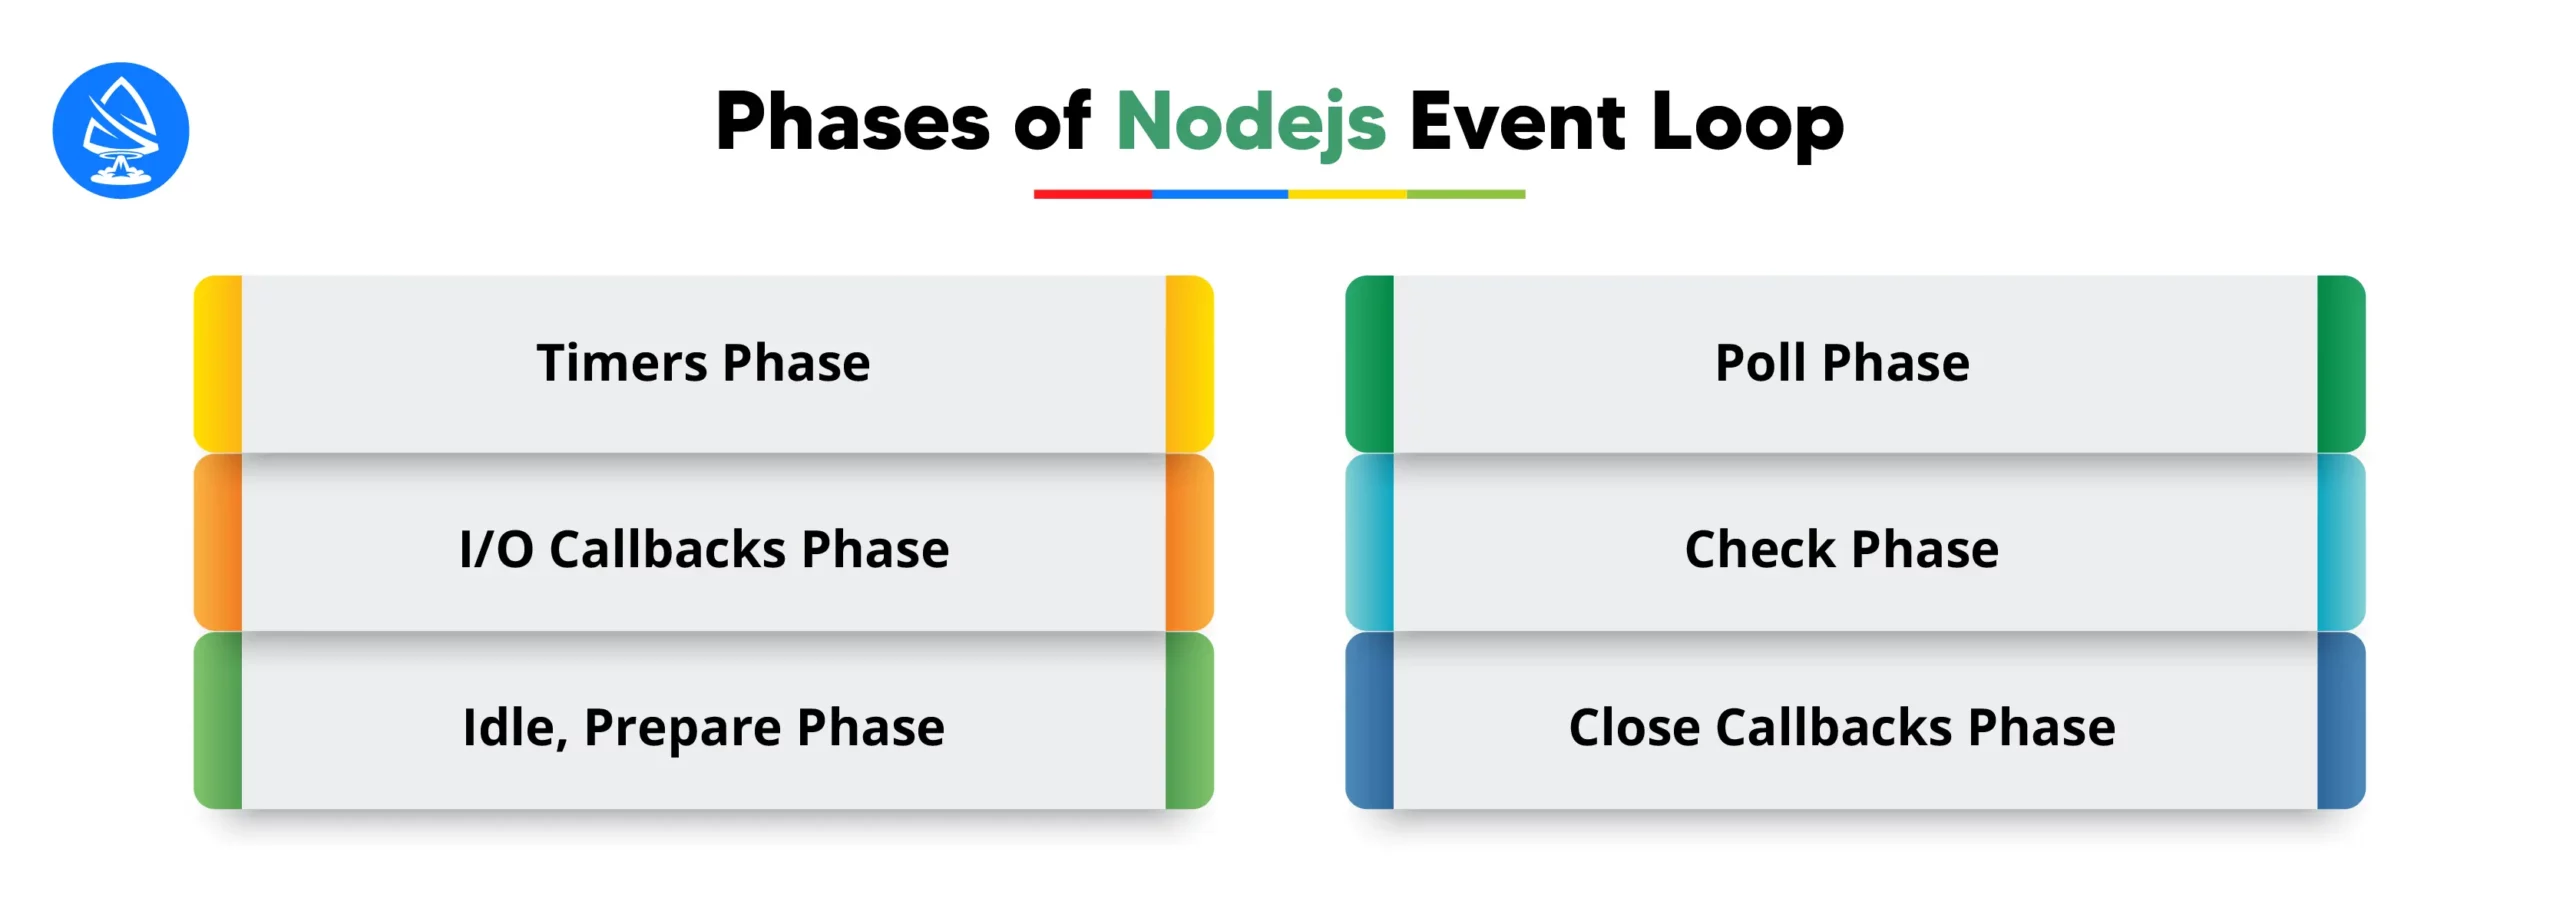 Phases of Nodejs Event Loop 